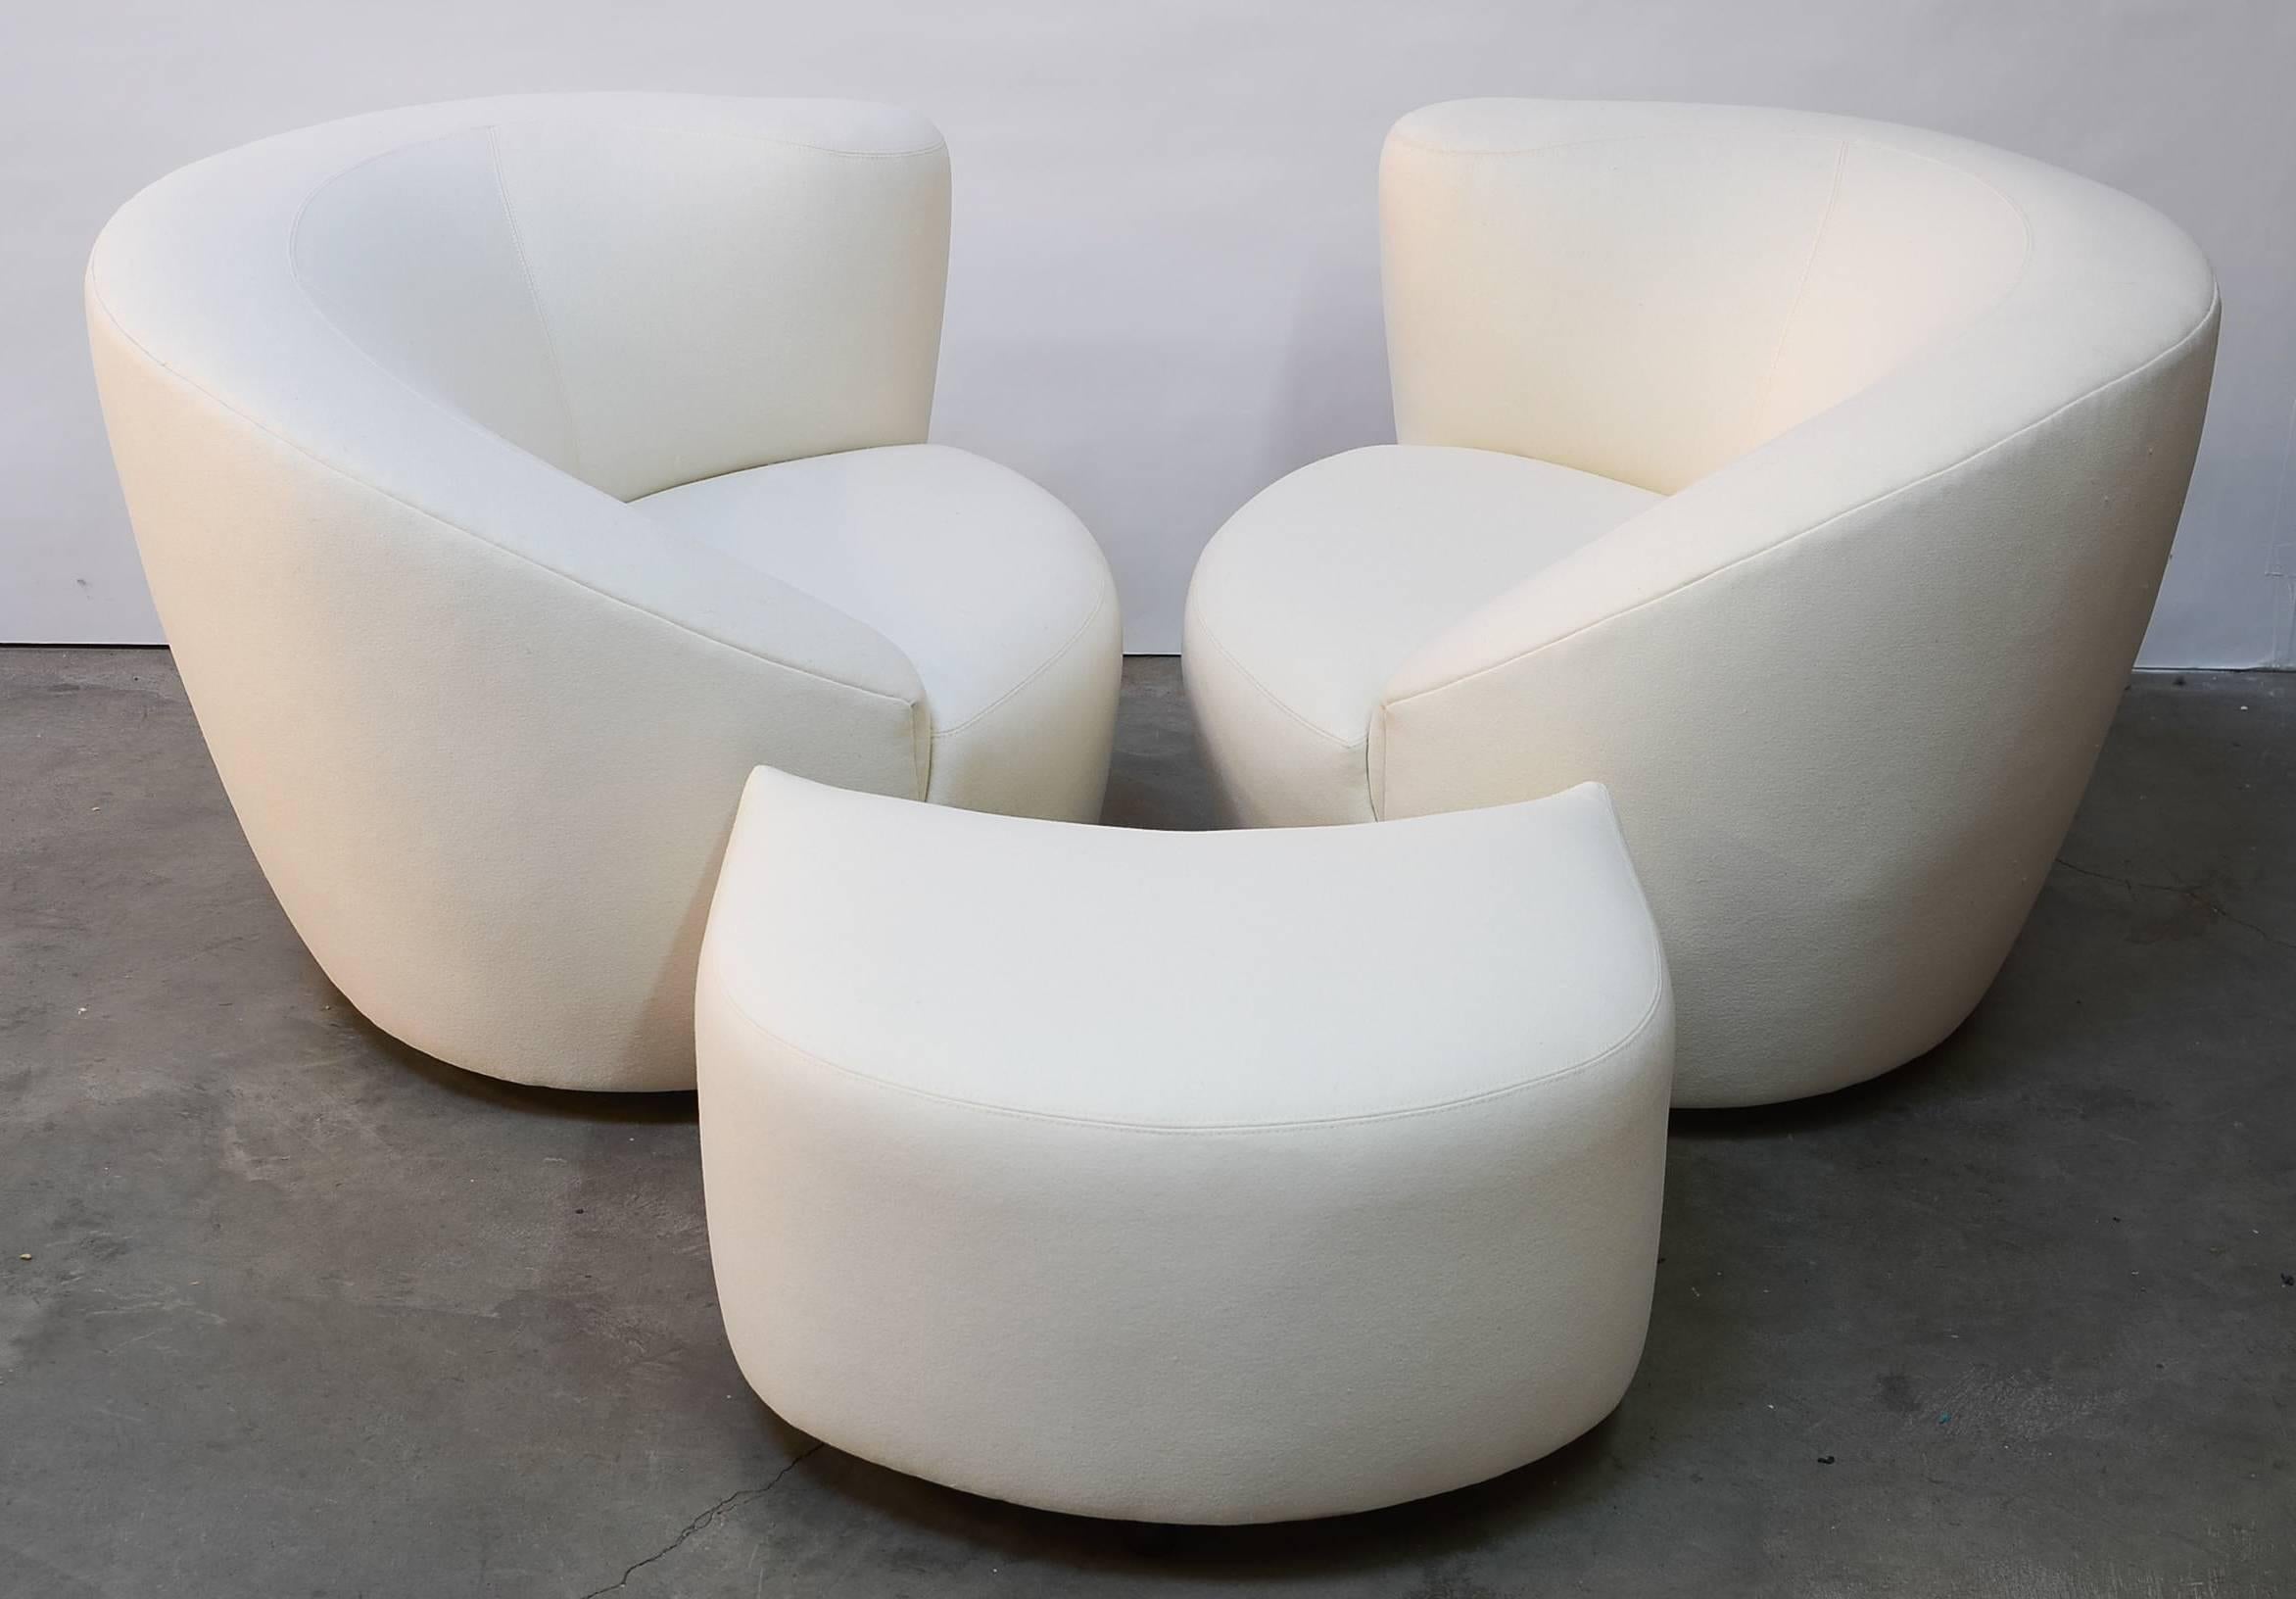 Offered is a beautifully restored set of Vladimir Kagan lounge chairs expertly reupholstered in boiled wool by Maharam (Denmark). The internals have been correctly restored to above factory spec using latex foam and Pirelli strapping. Included is an